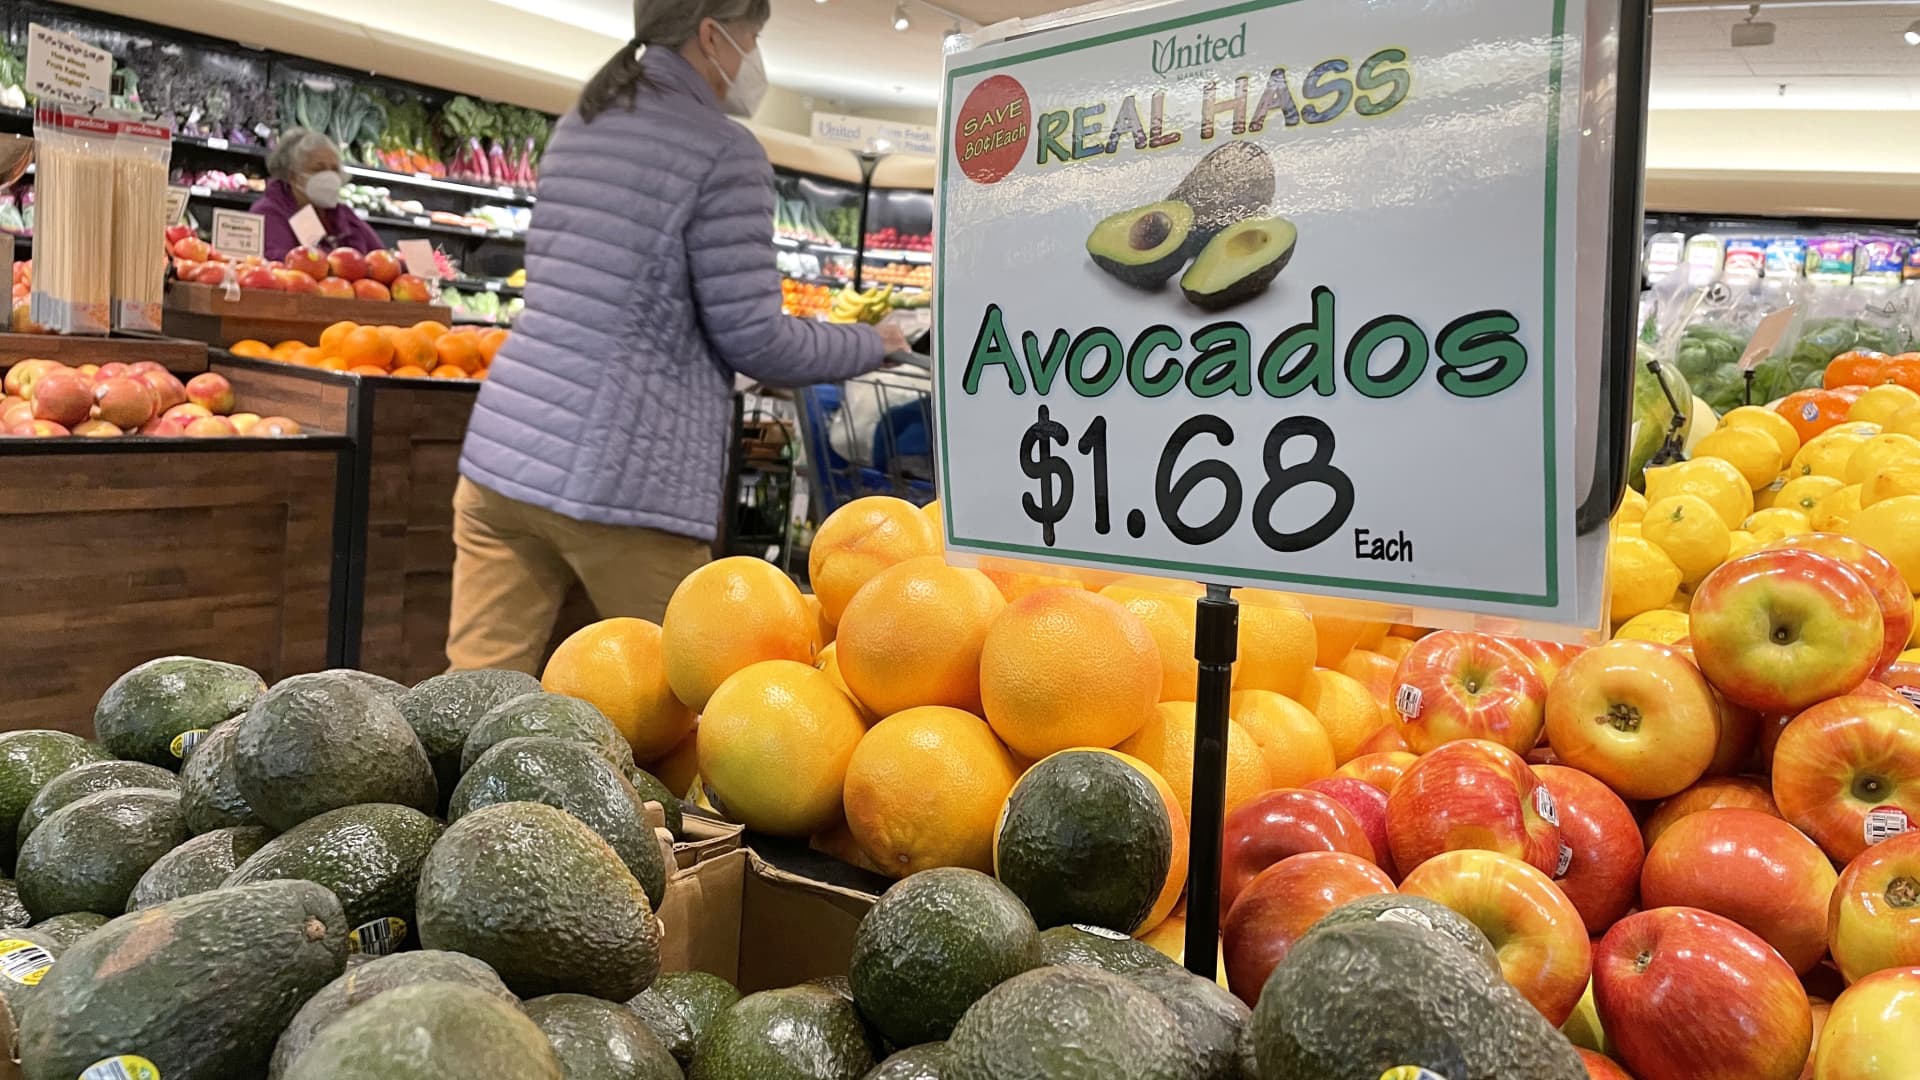 Hass avocados are displayed in the produce section at a United Market on Feb. 7, 2022 in San Anselmo, California.